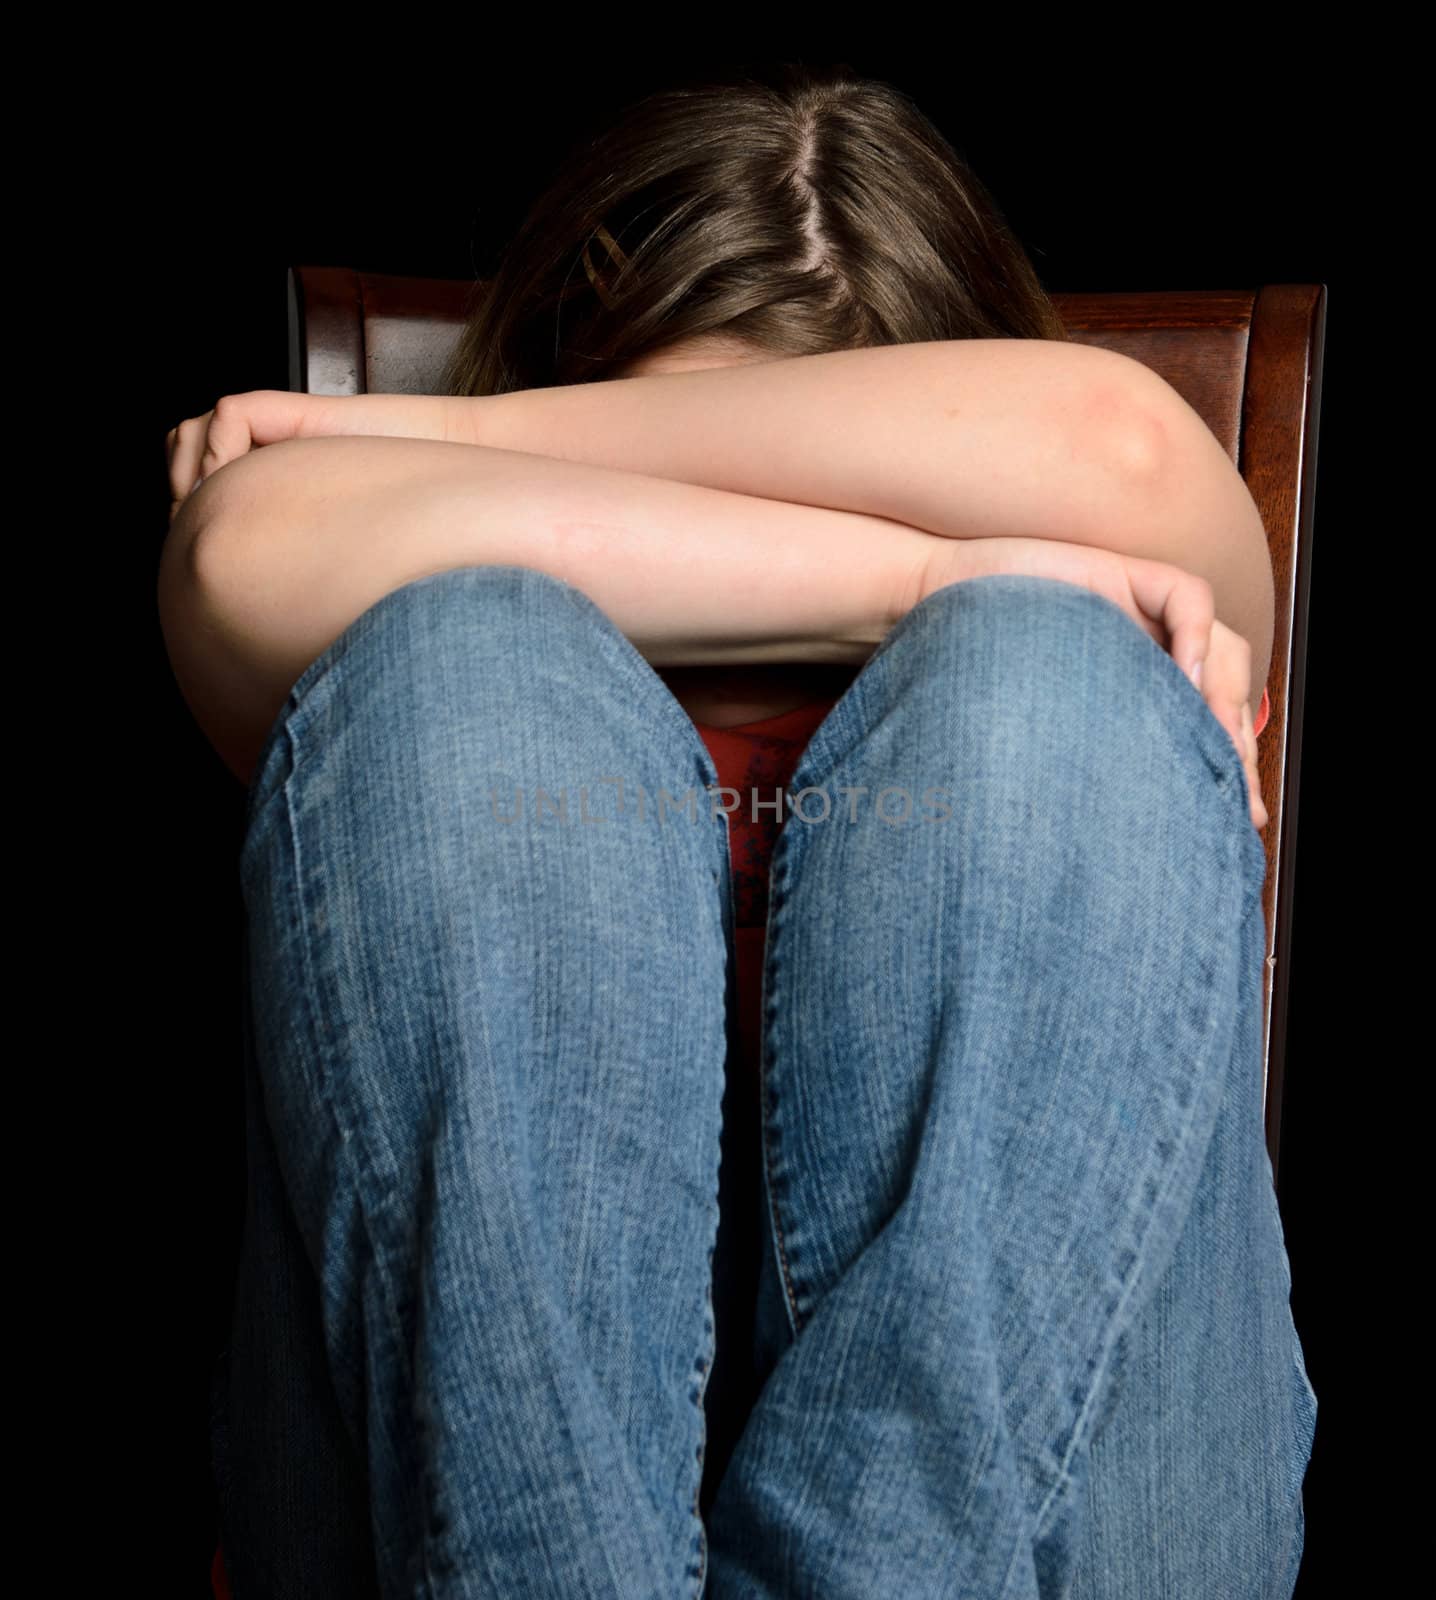 A sad girl holding her head in her arms, while sitting on a chair, isolated on black.